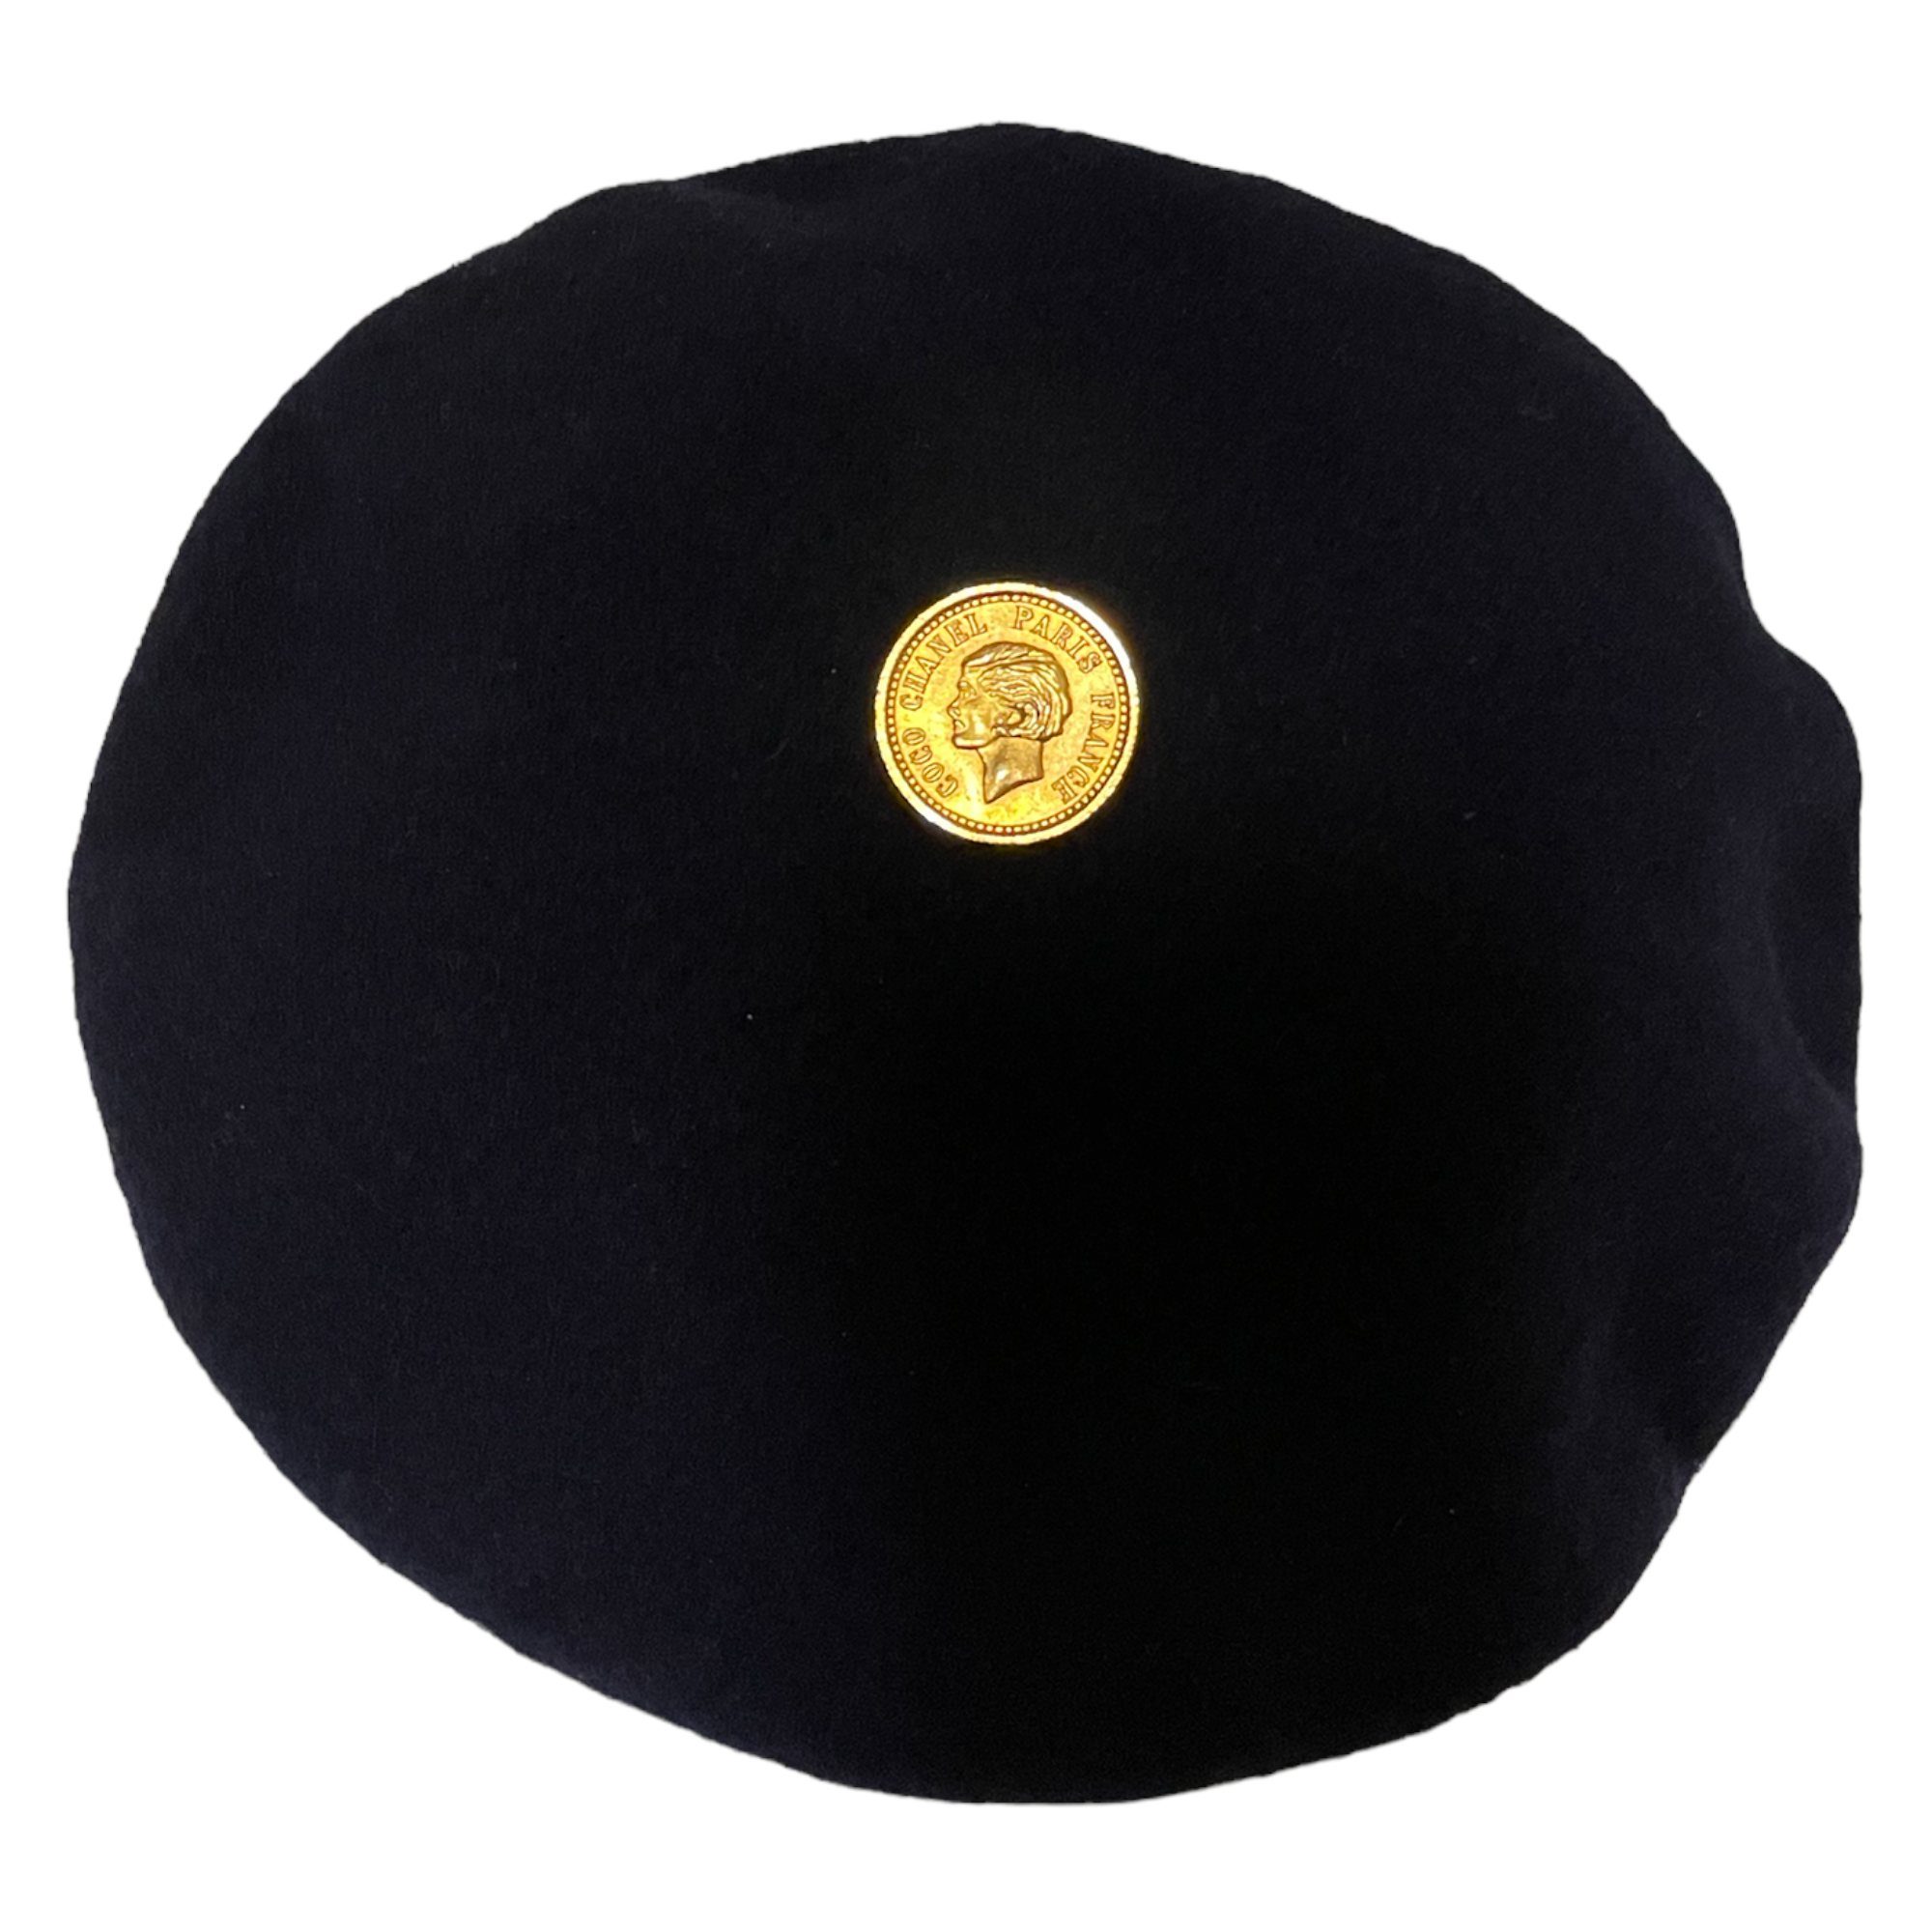 CHANEL Classic Lambswool Vintage Beret